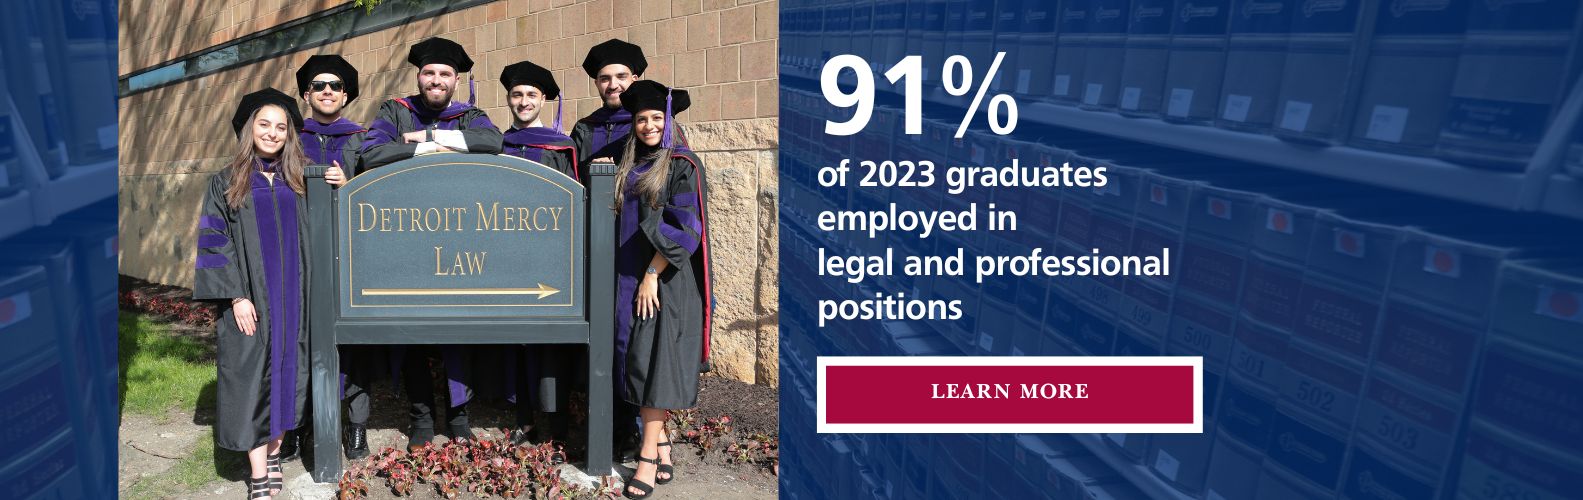 90% of 2022 graduates employed in legal and professional positions